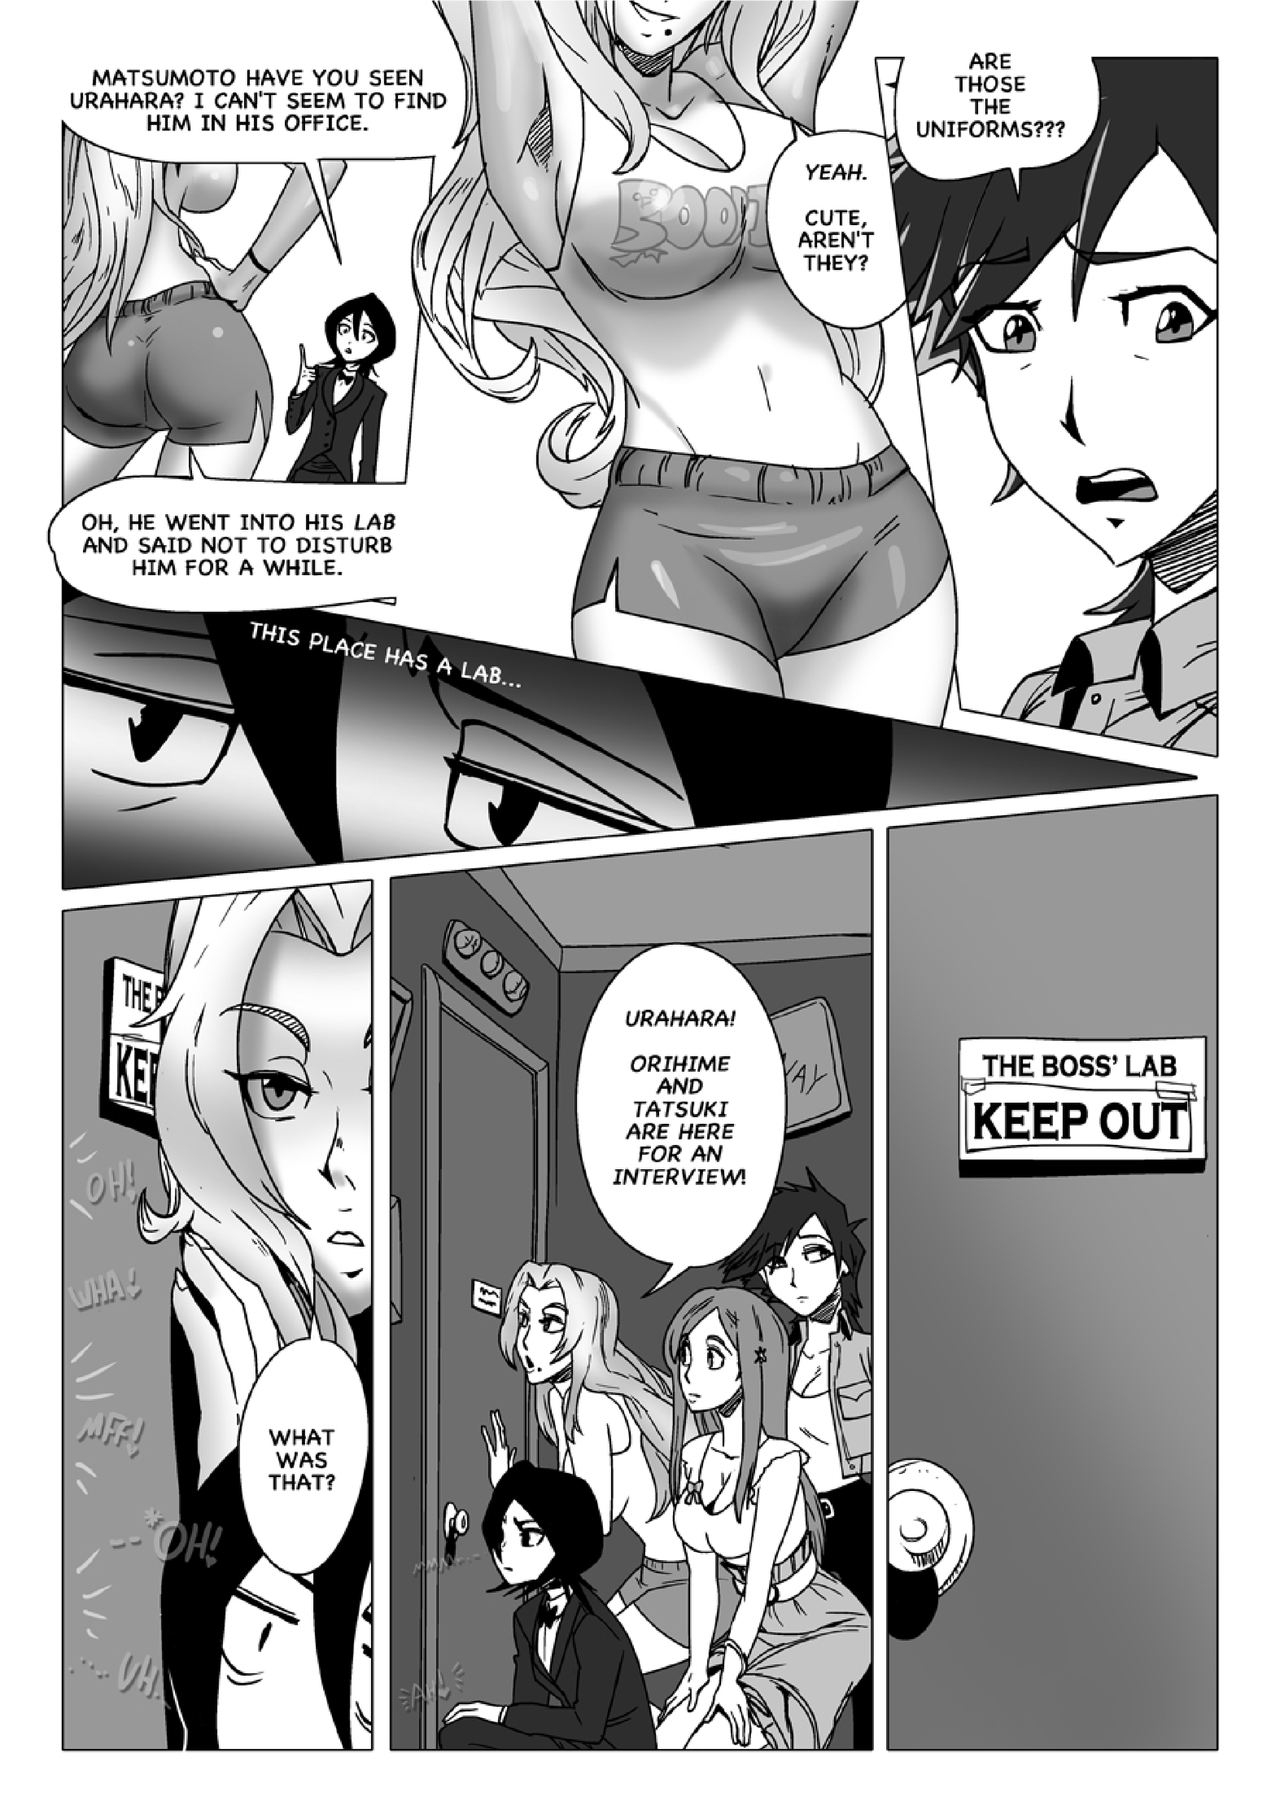 [Gairon] Happy to Serve You - Chapter 2 (Bleach) 5